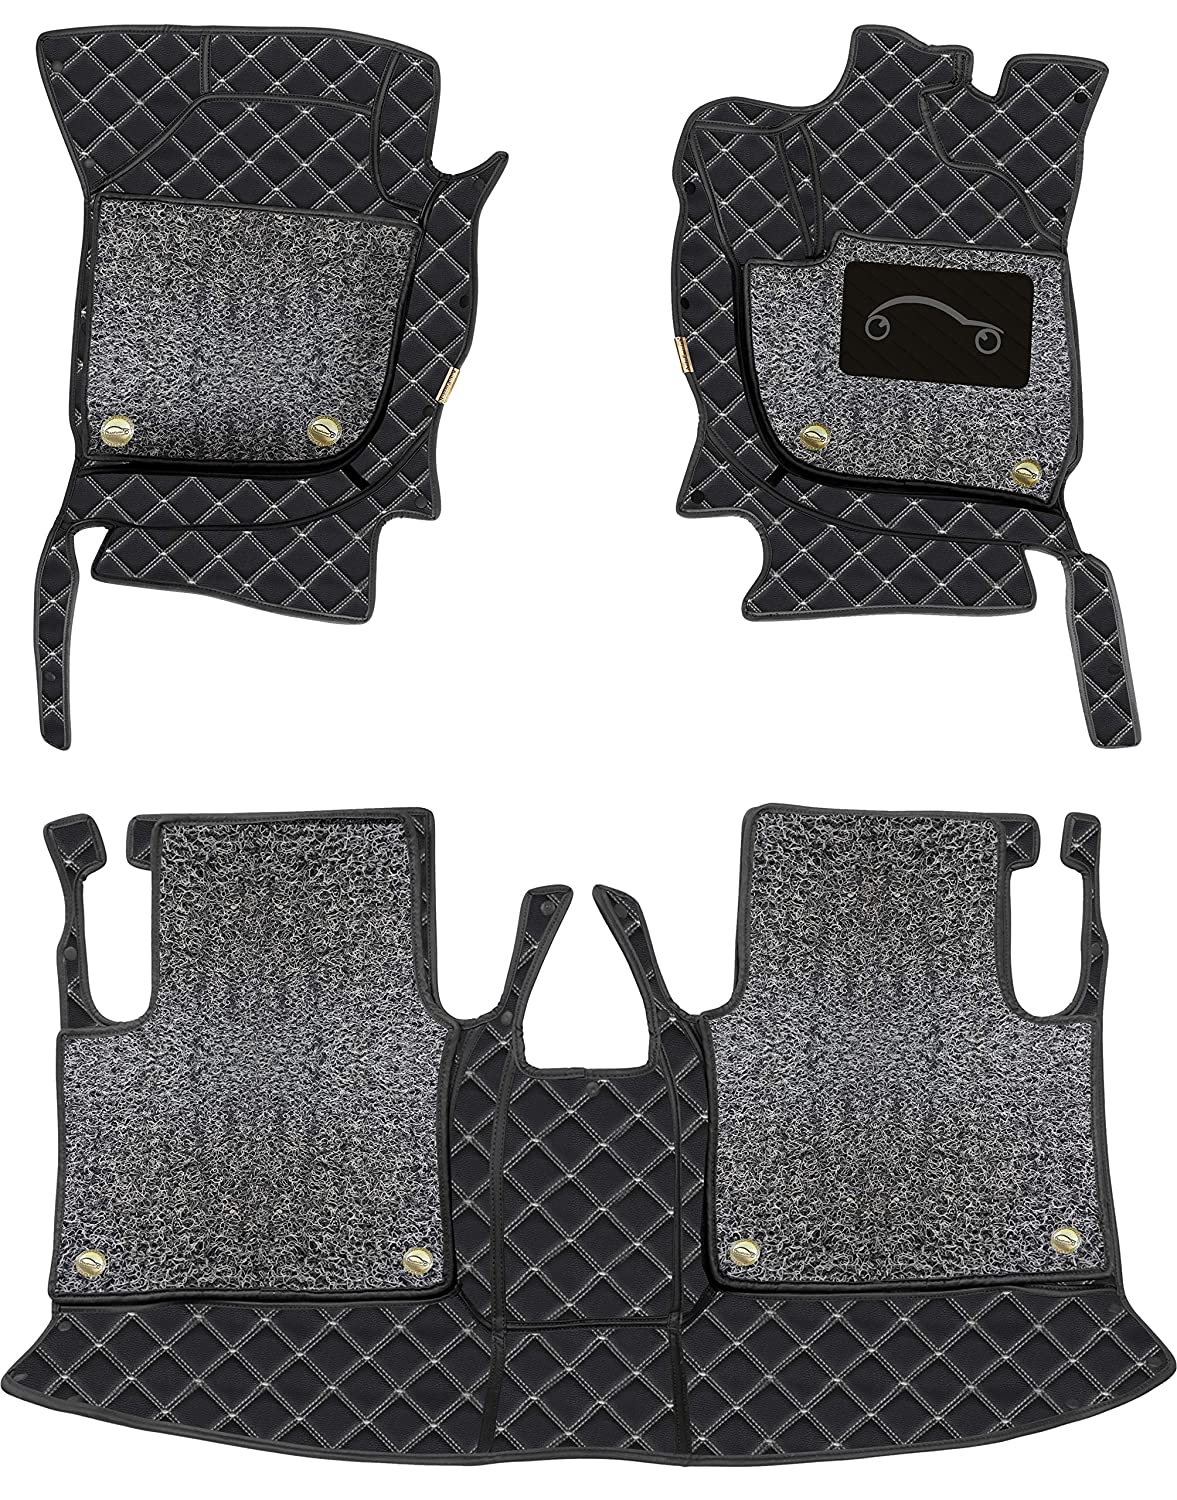 Mercedes A180 7D Luxury Car Mat, All Weather Proof, Anti-Skid, 100% Waterproof & Odorless with Unique Diamond Fish Design (24mm Luxury PU Leather, 2 Rows)